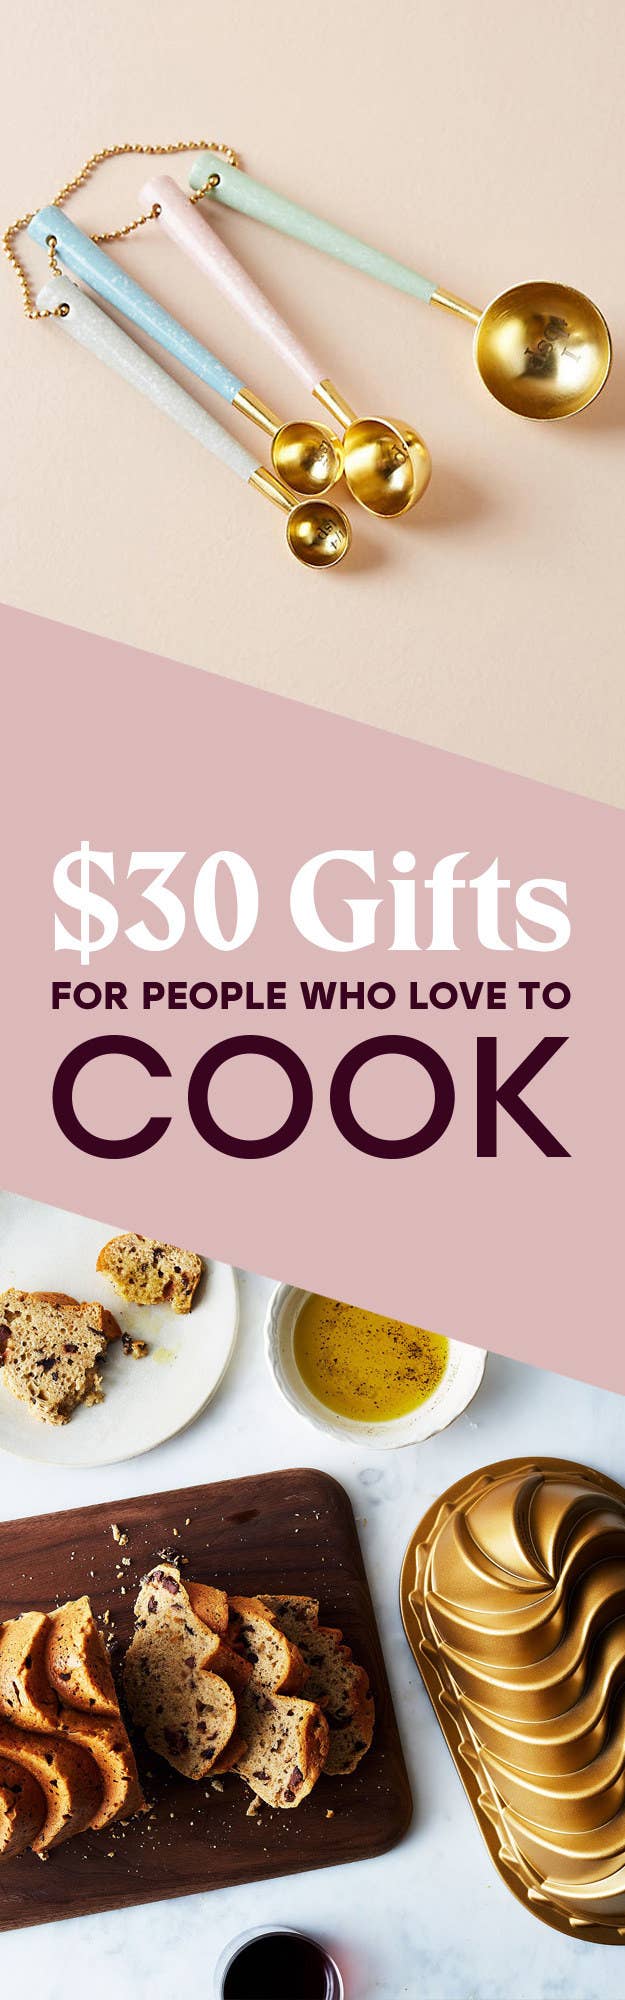 Top-Rated Christmas Kitchen Gifts Under $30